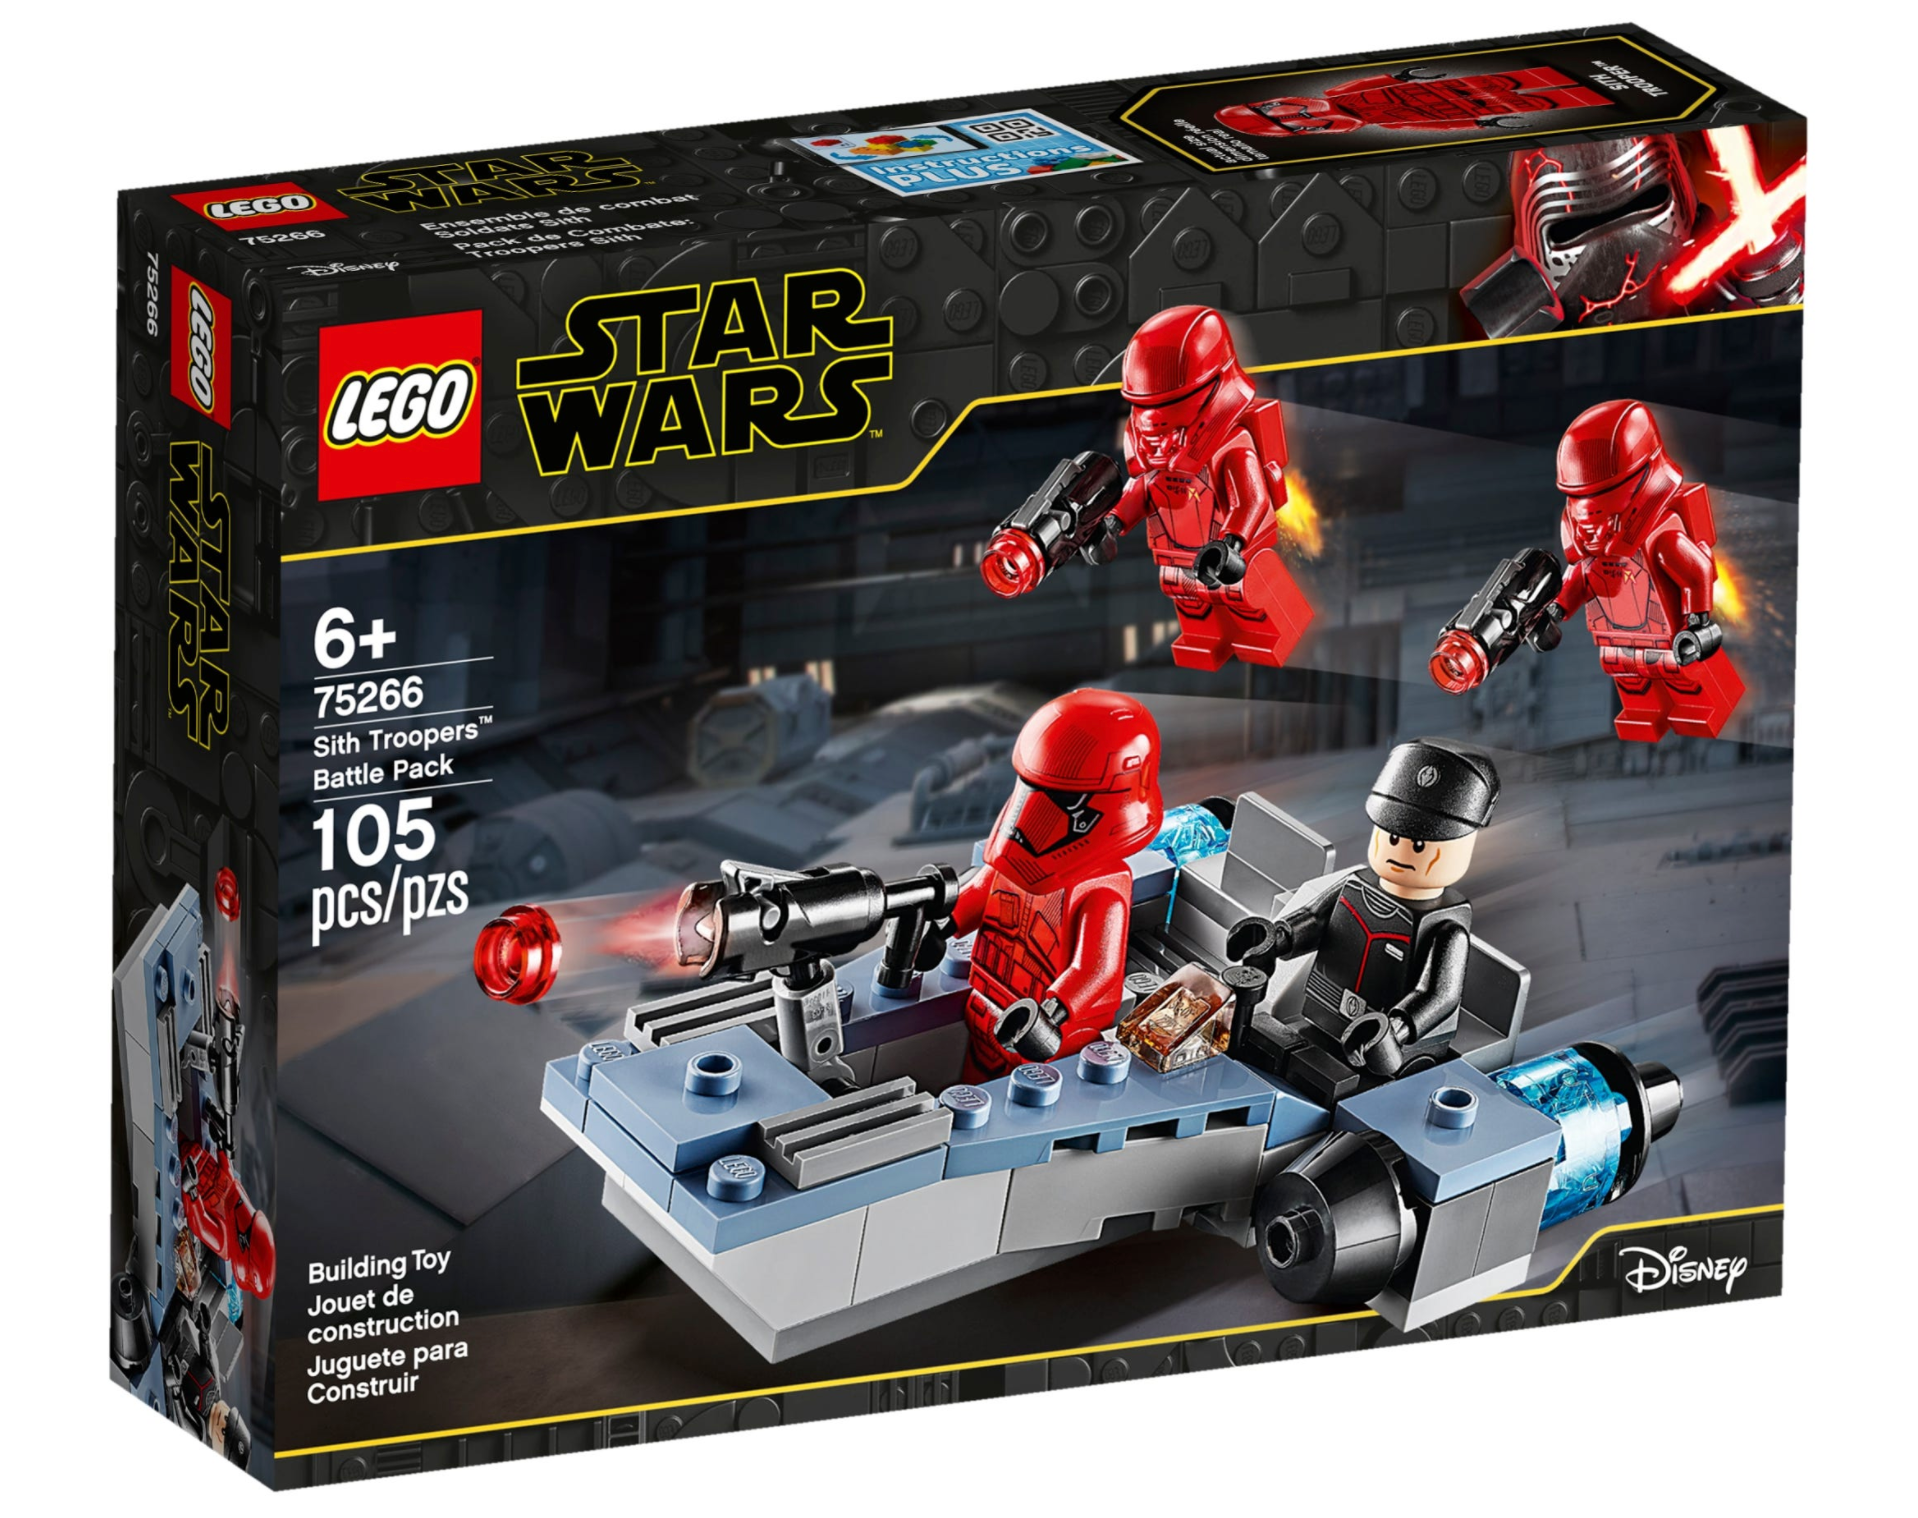 LEGO: Star Wars - Sith Troopers™ Battle Pack